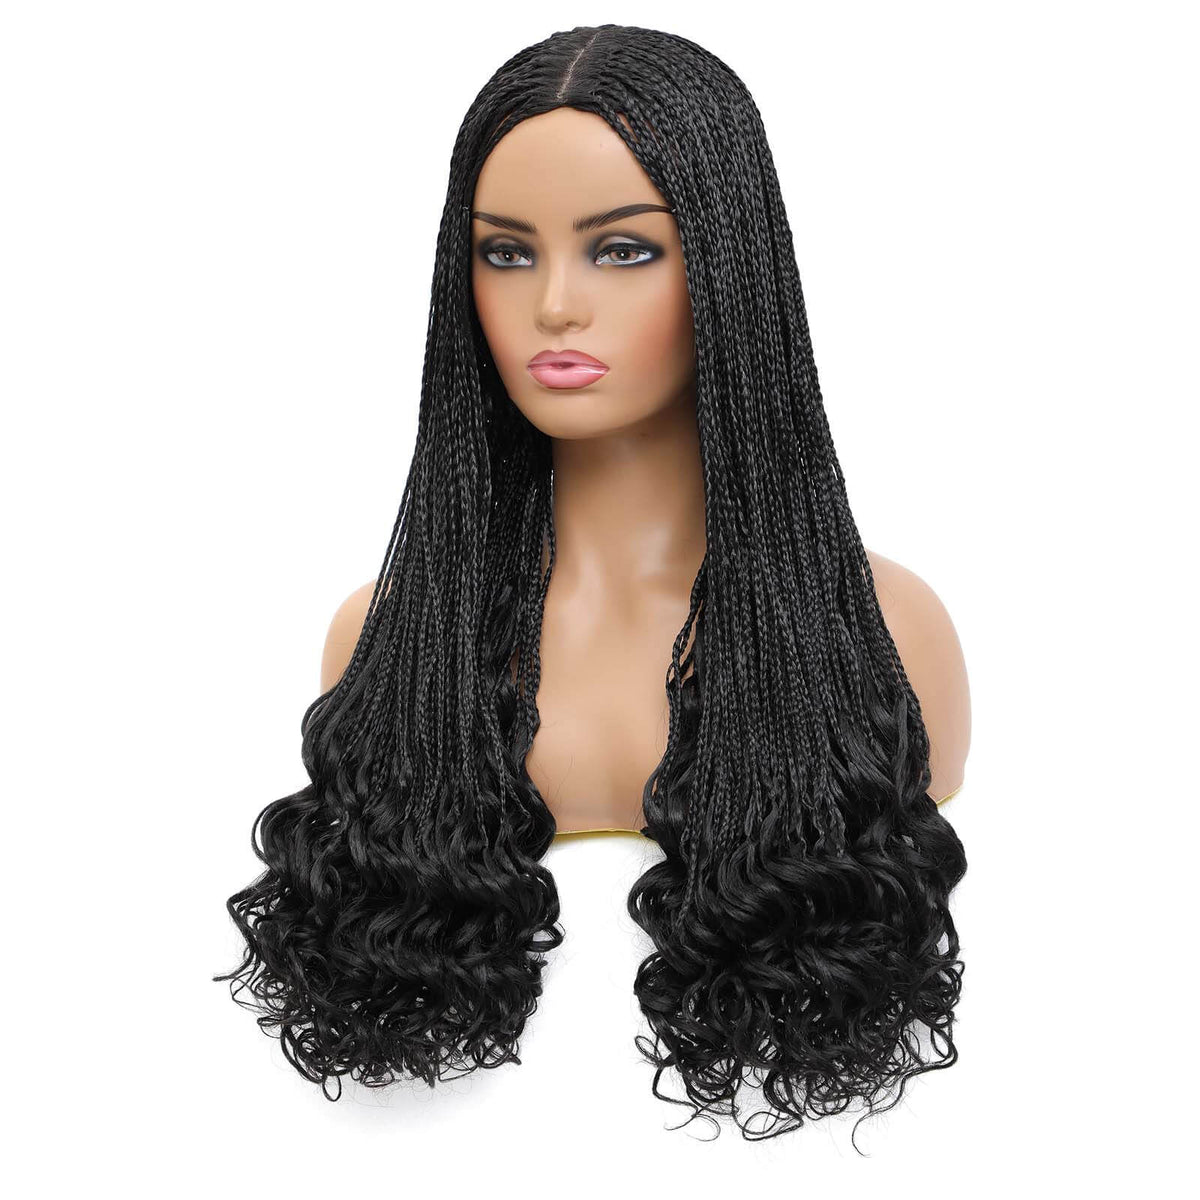 Box Braided Wig with Goddess Curly Ends Black Color Side Show